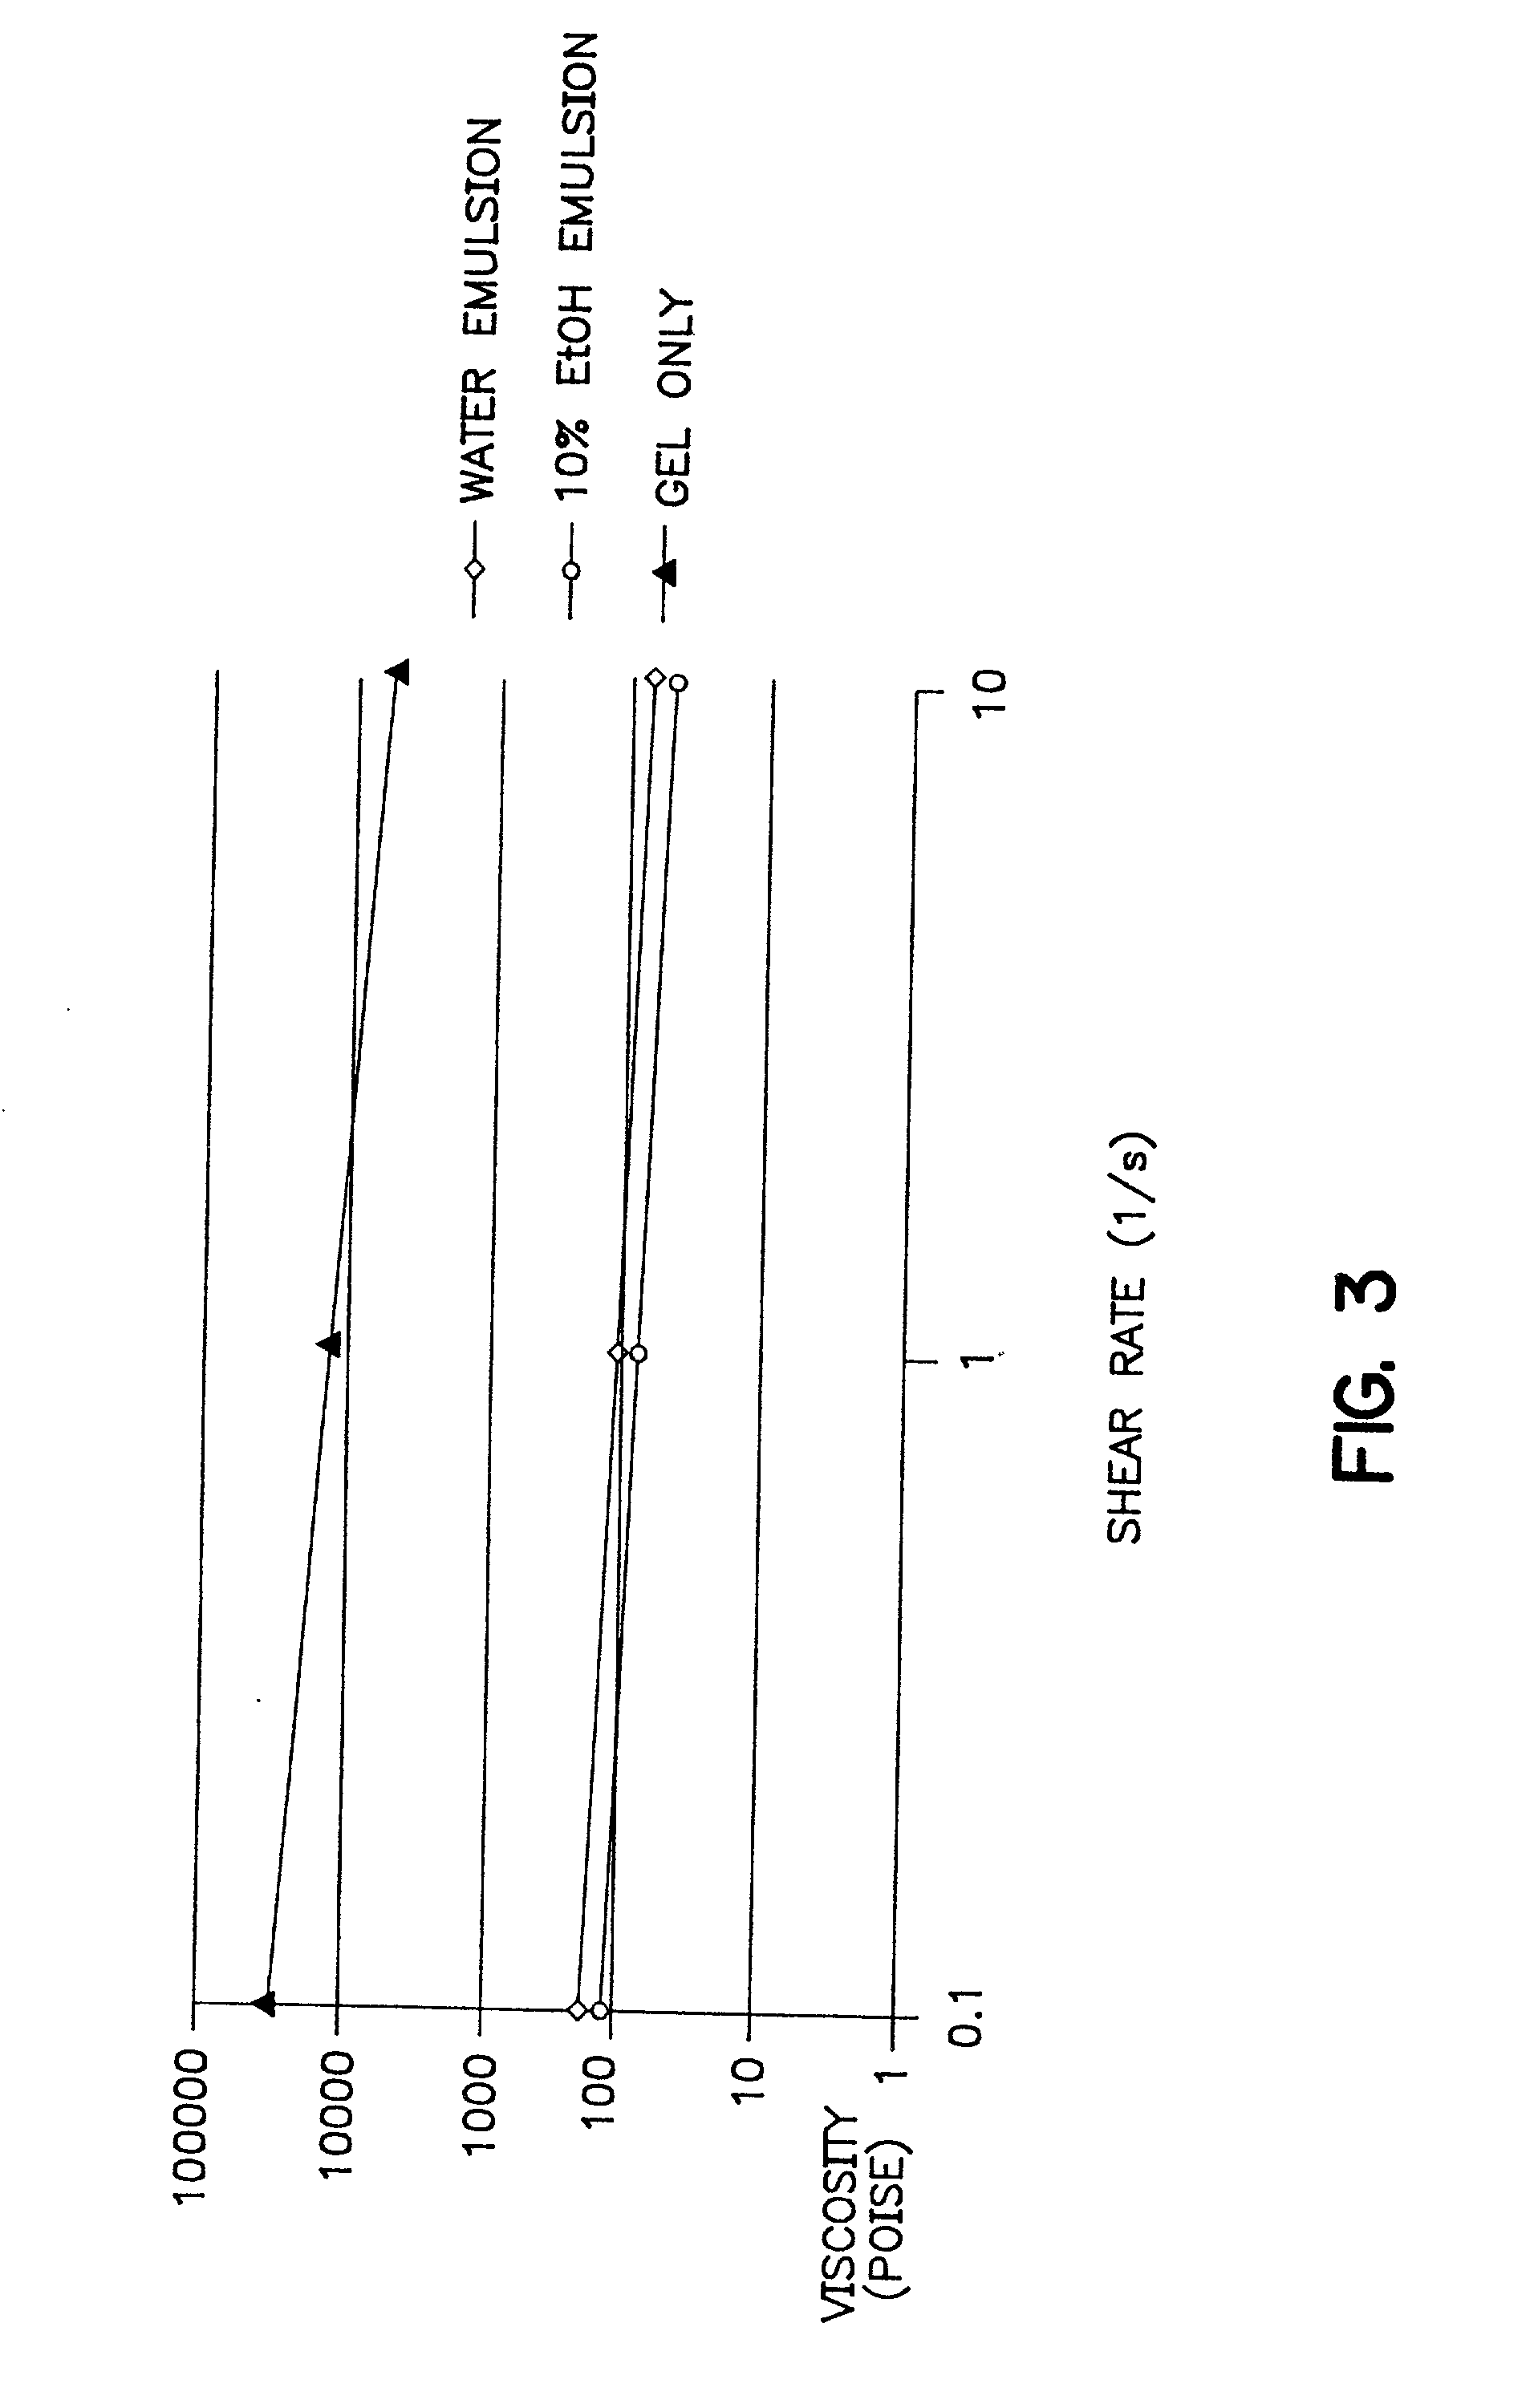 Injectable depot gel composition and method of preparing the composition